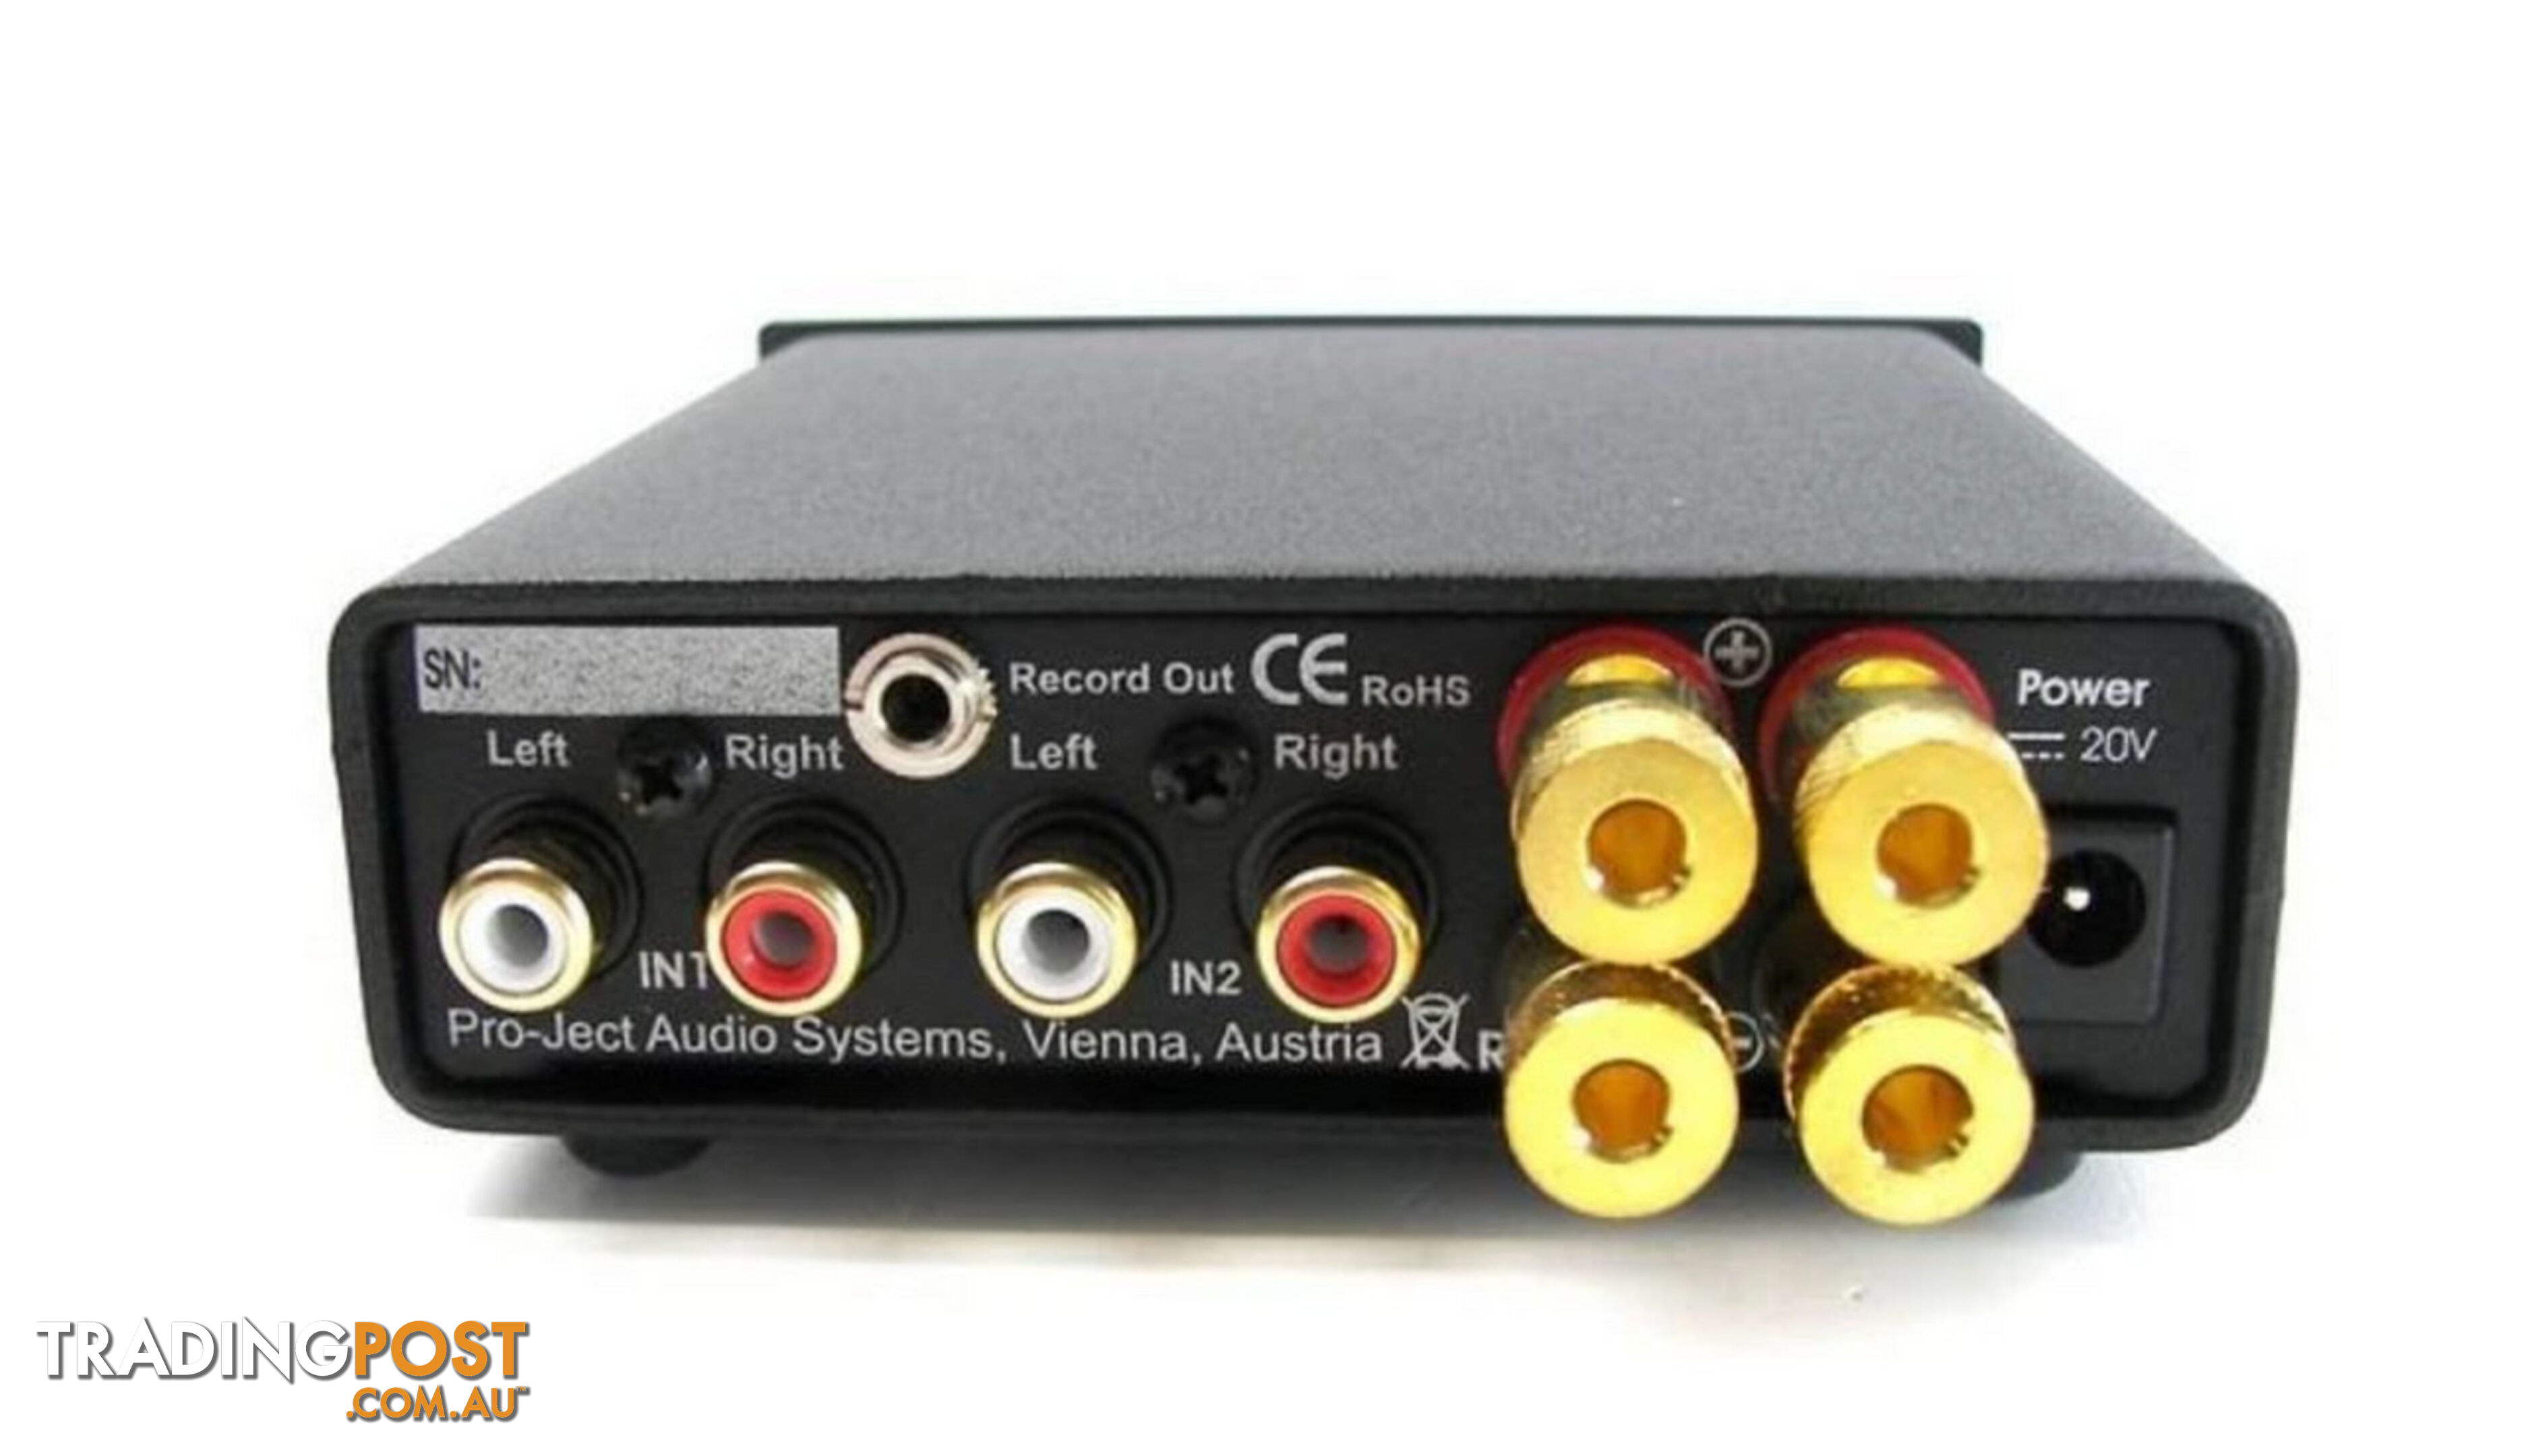 ProJect Stereo Box DS3 Integrated Amplifier